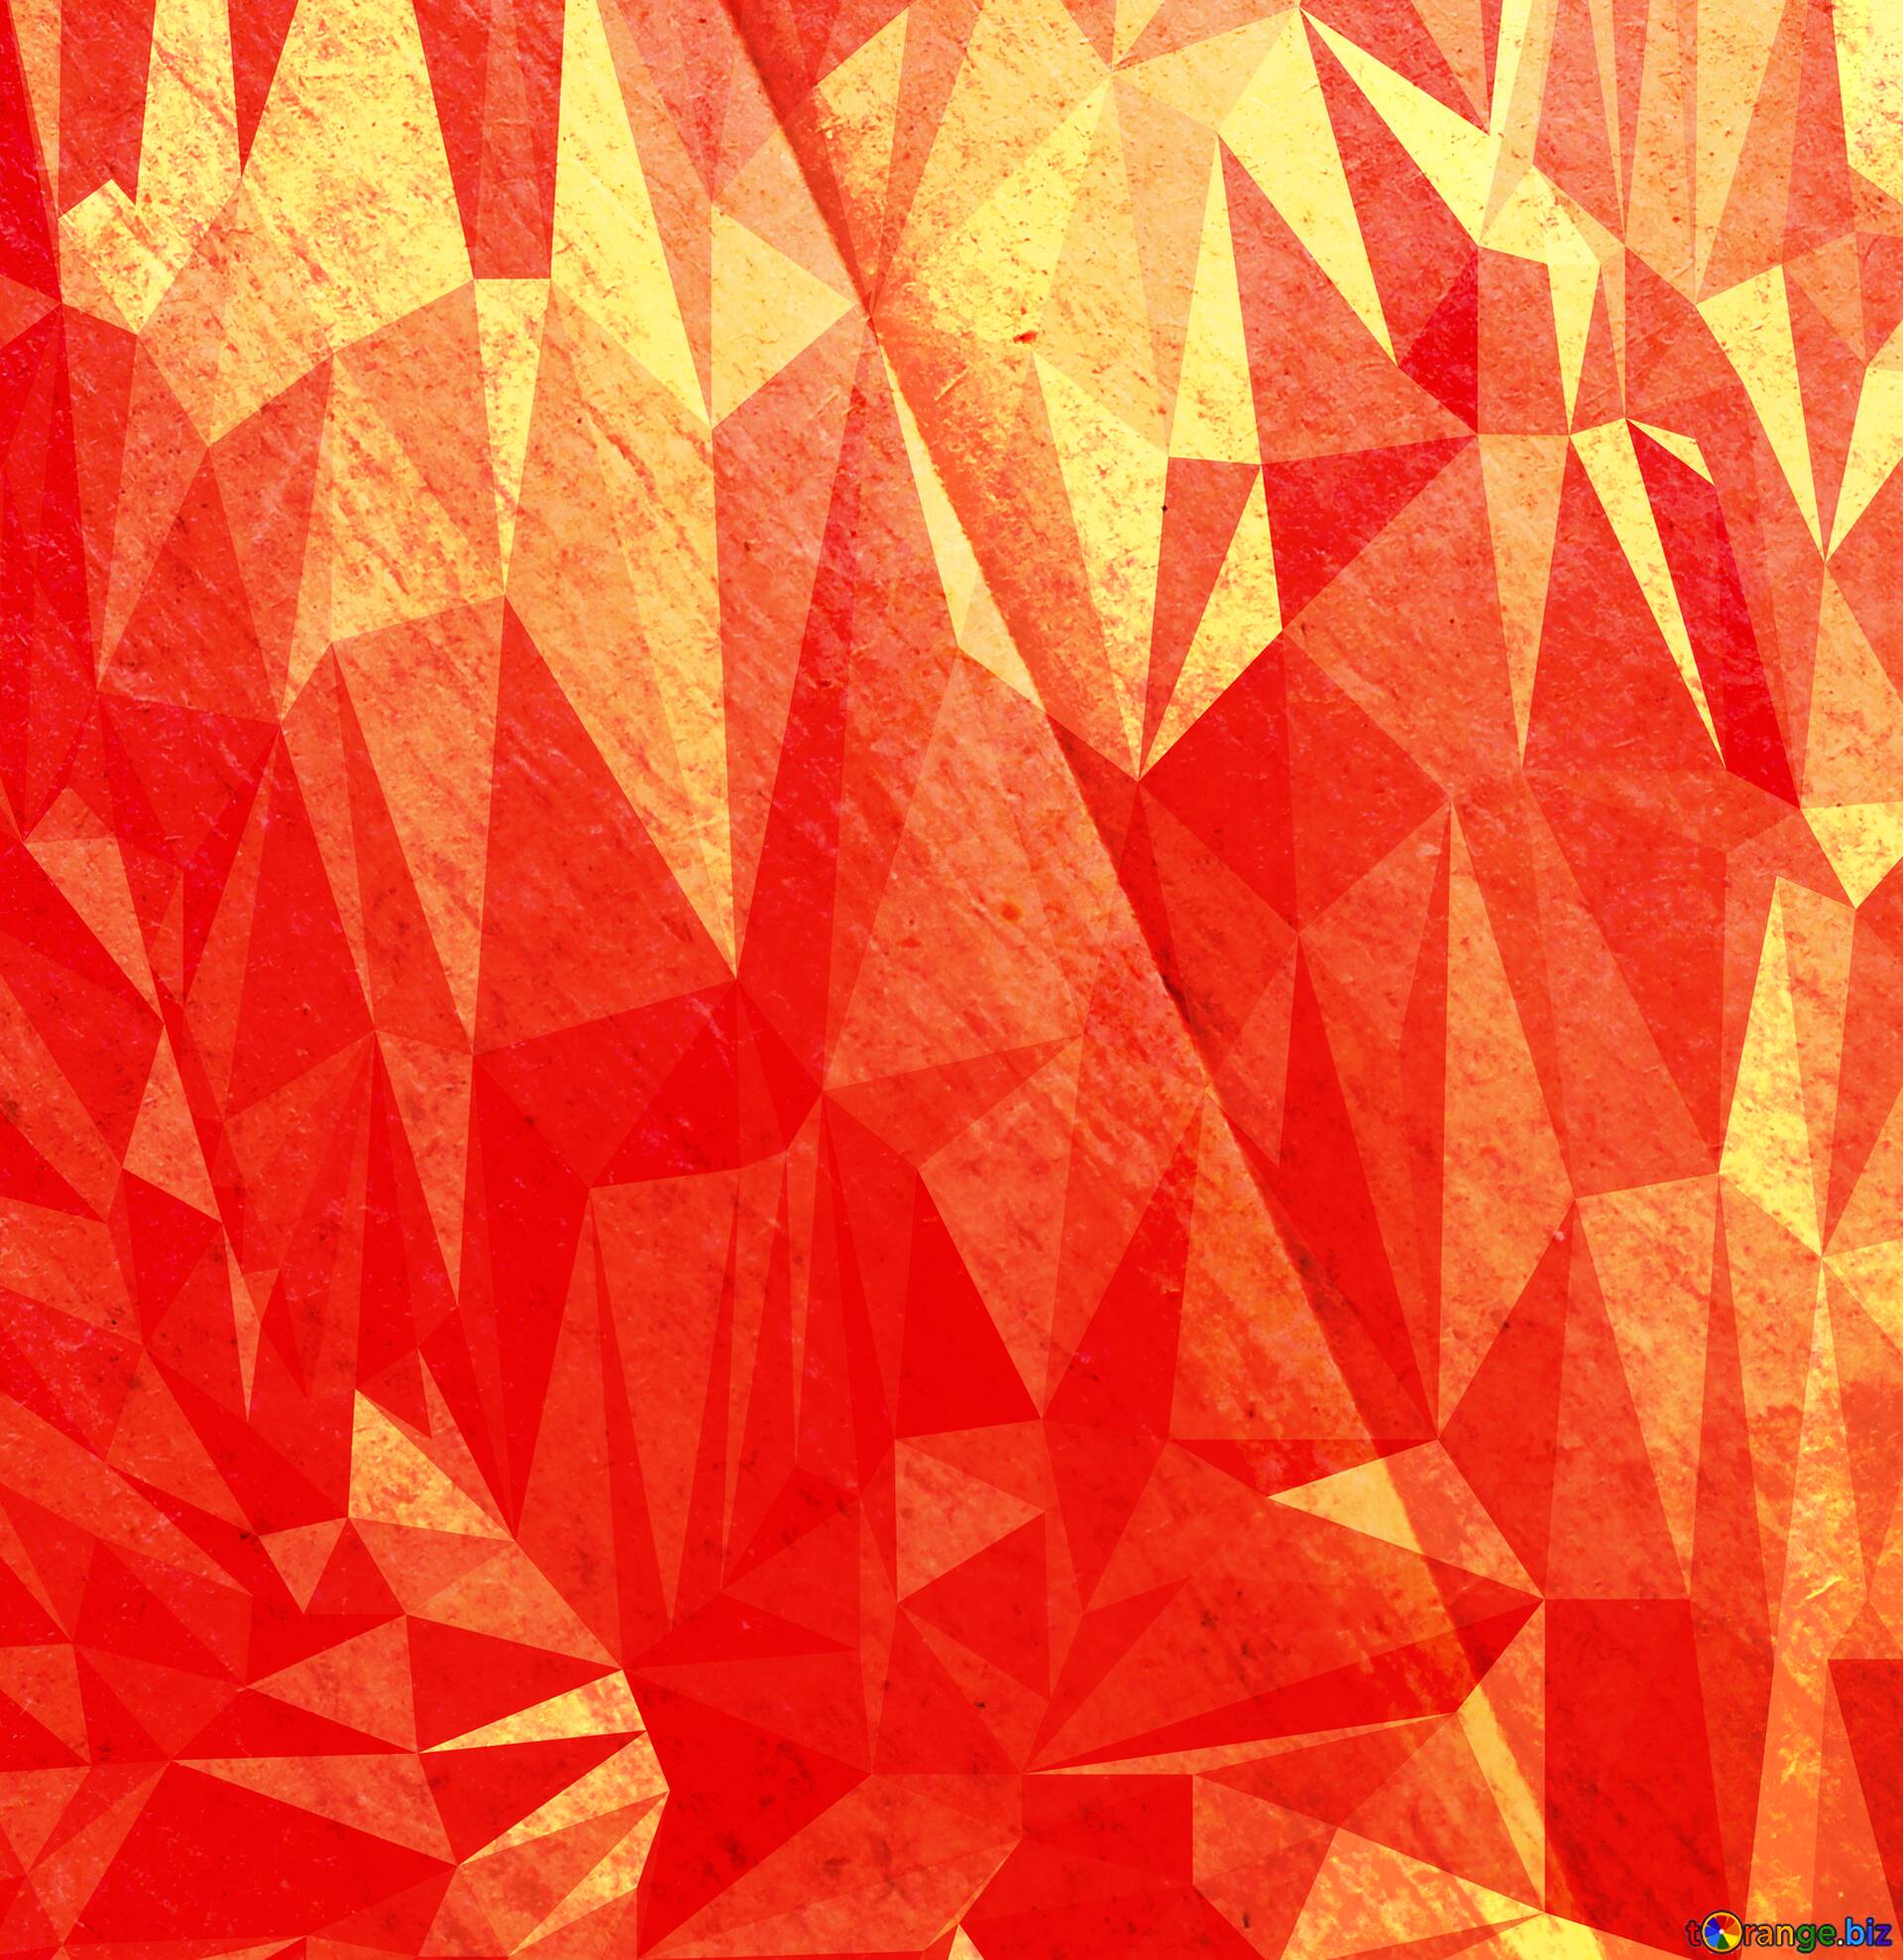 Download Free Picture The Texture Of The Folded Paper Polygonal Abstract Geometrical Background With Triangles Red Paper On CC BY License Free Image Stock TOrange.biz Fx №203131